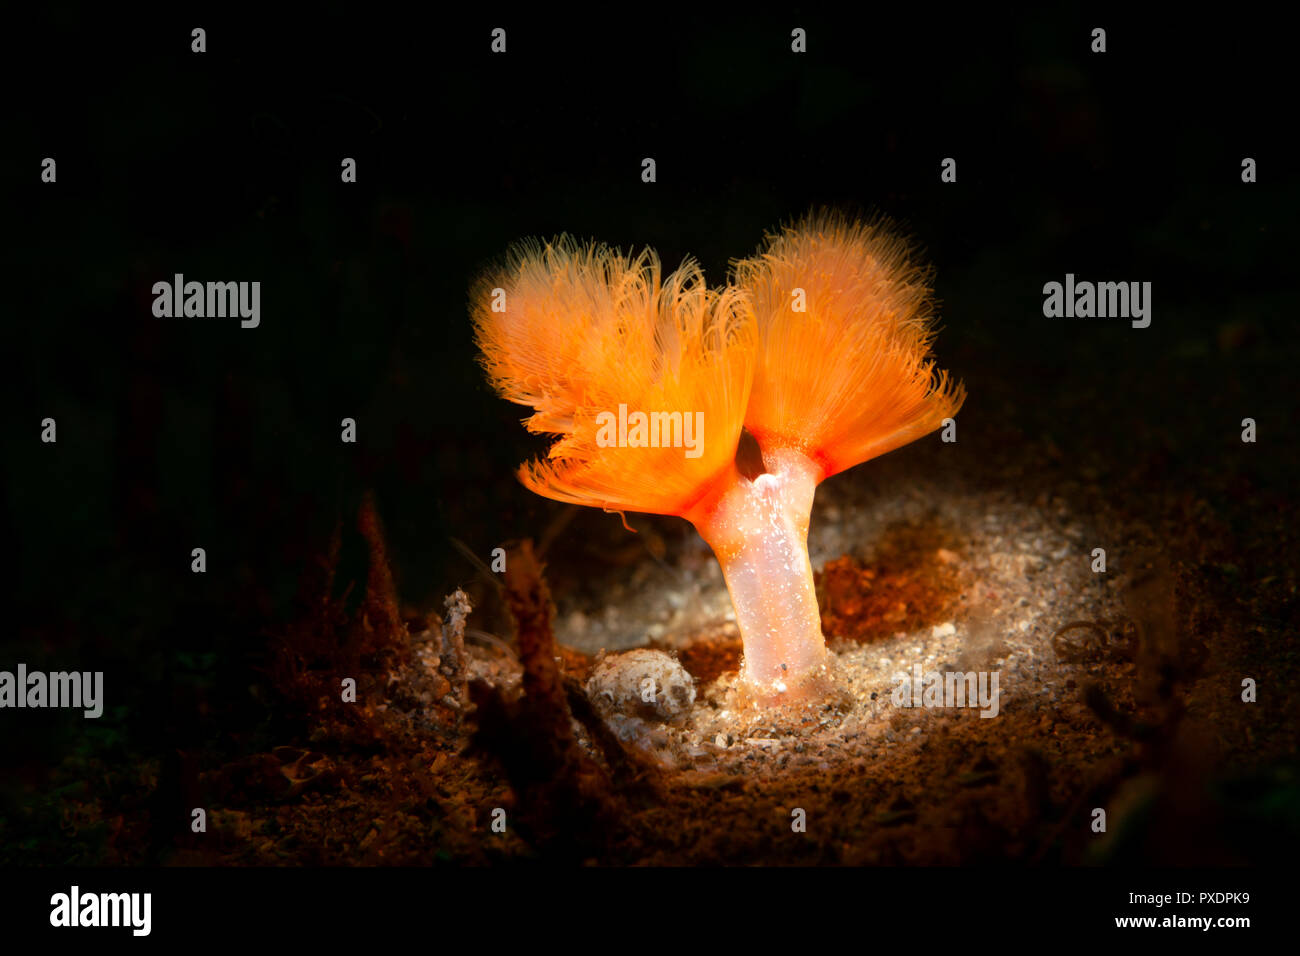 An orange plume worm lives in the sand of Californias ocean bottom. To give the invertebrate a unique look, the animal was lit by a circular snoot. Stock Photo